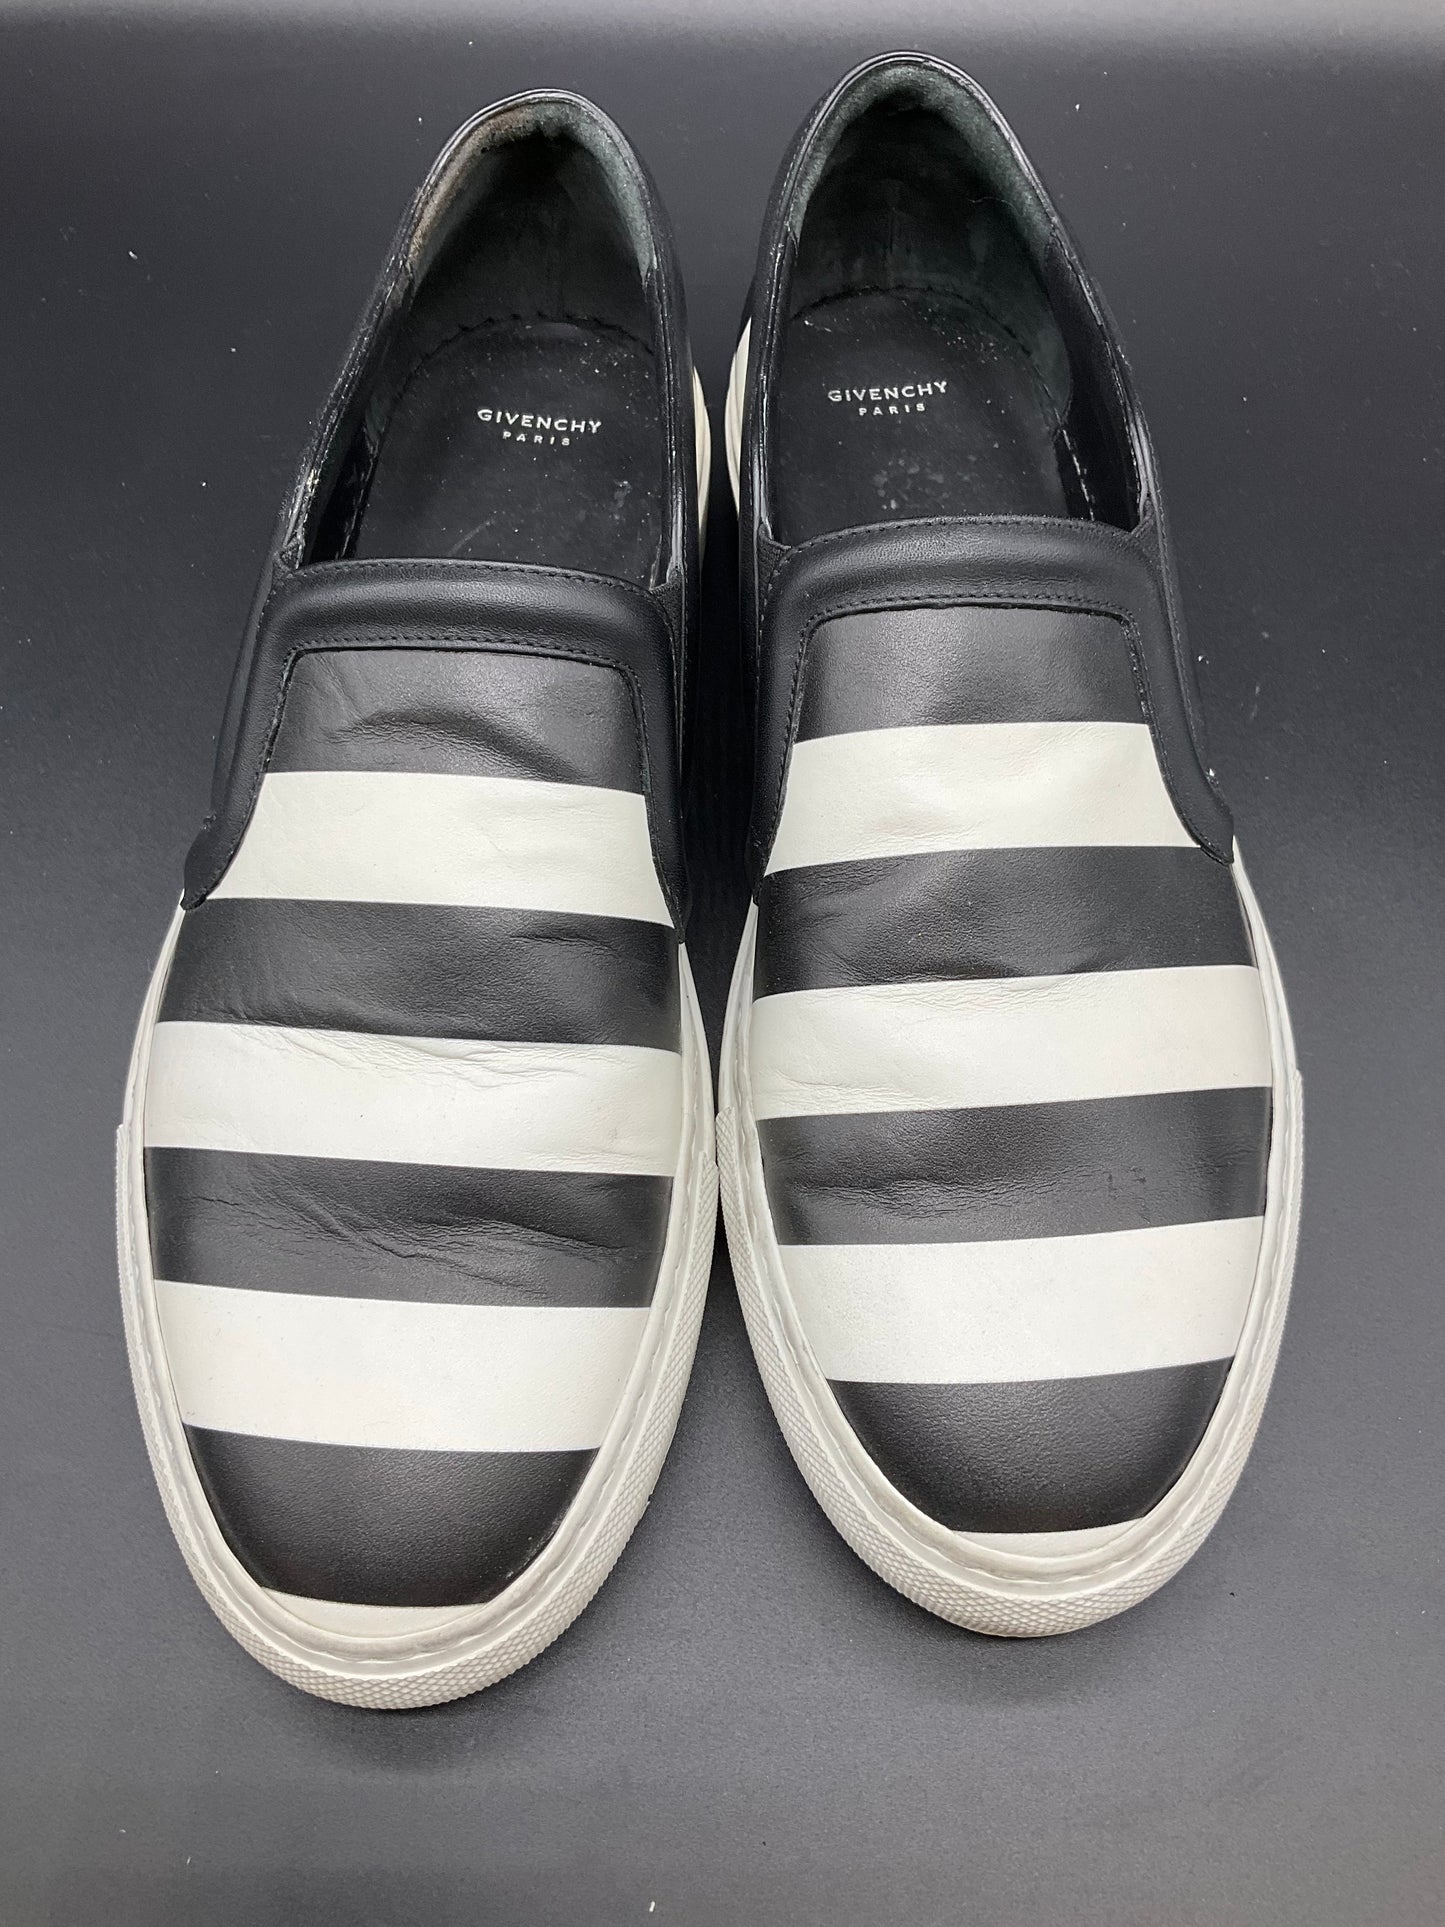 Givenchy Black and White Stripe Slip On Sneakers Size 41